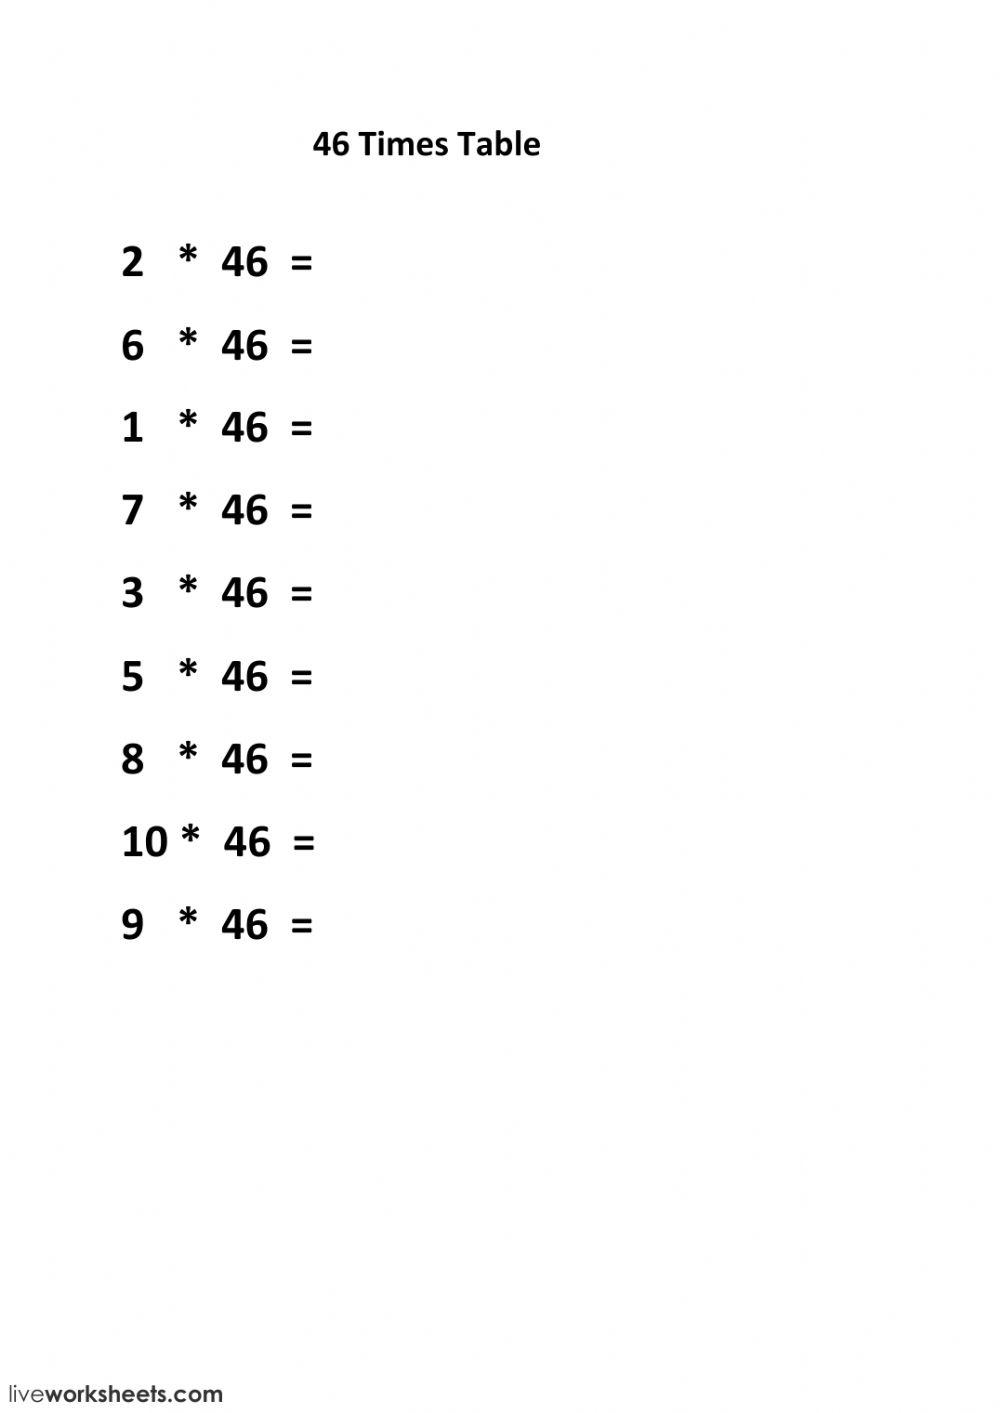 46 Times table